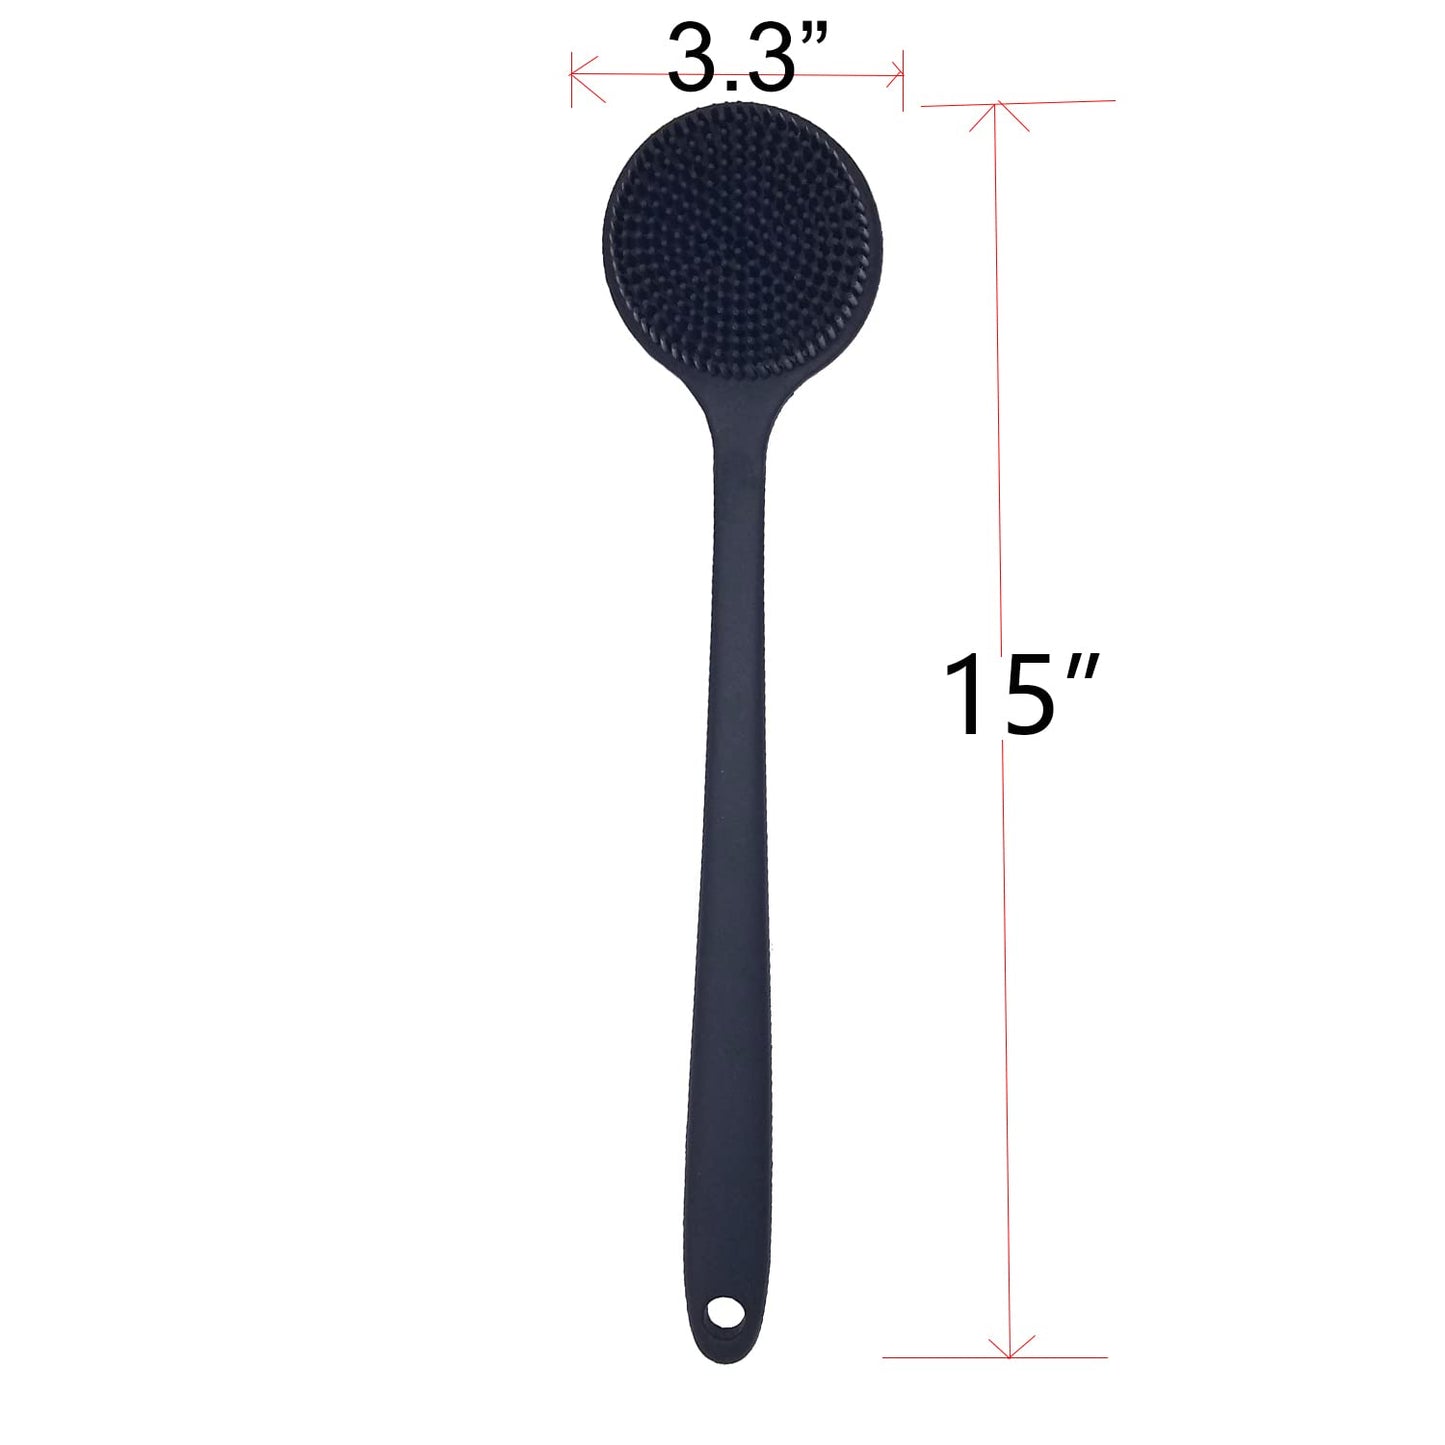 DNC Back Scrubber for Shower Soft Silicone Bath Body Brush with Long Handle (Black)